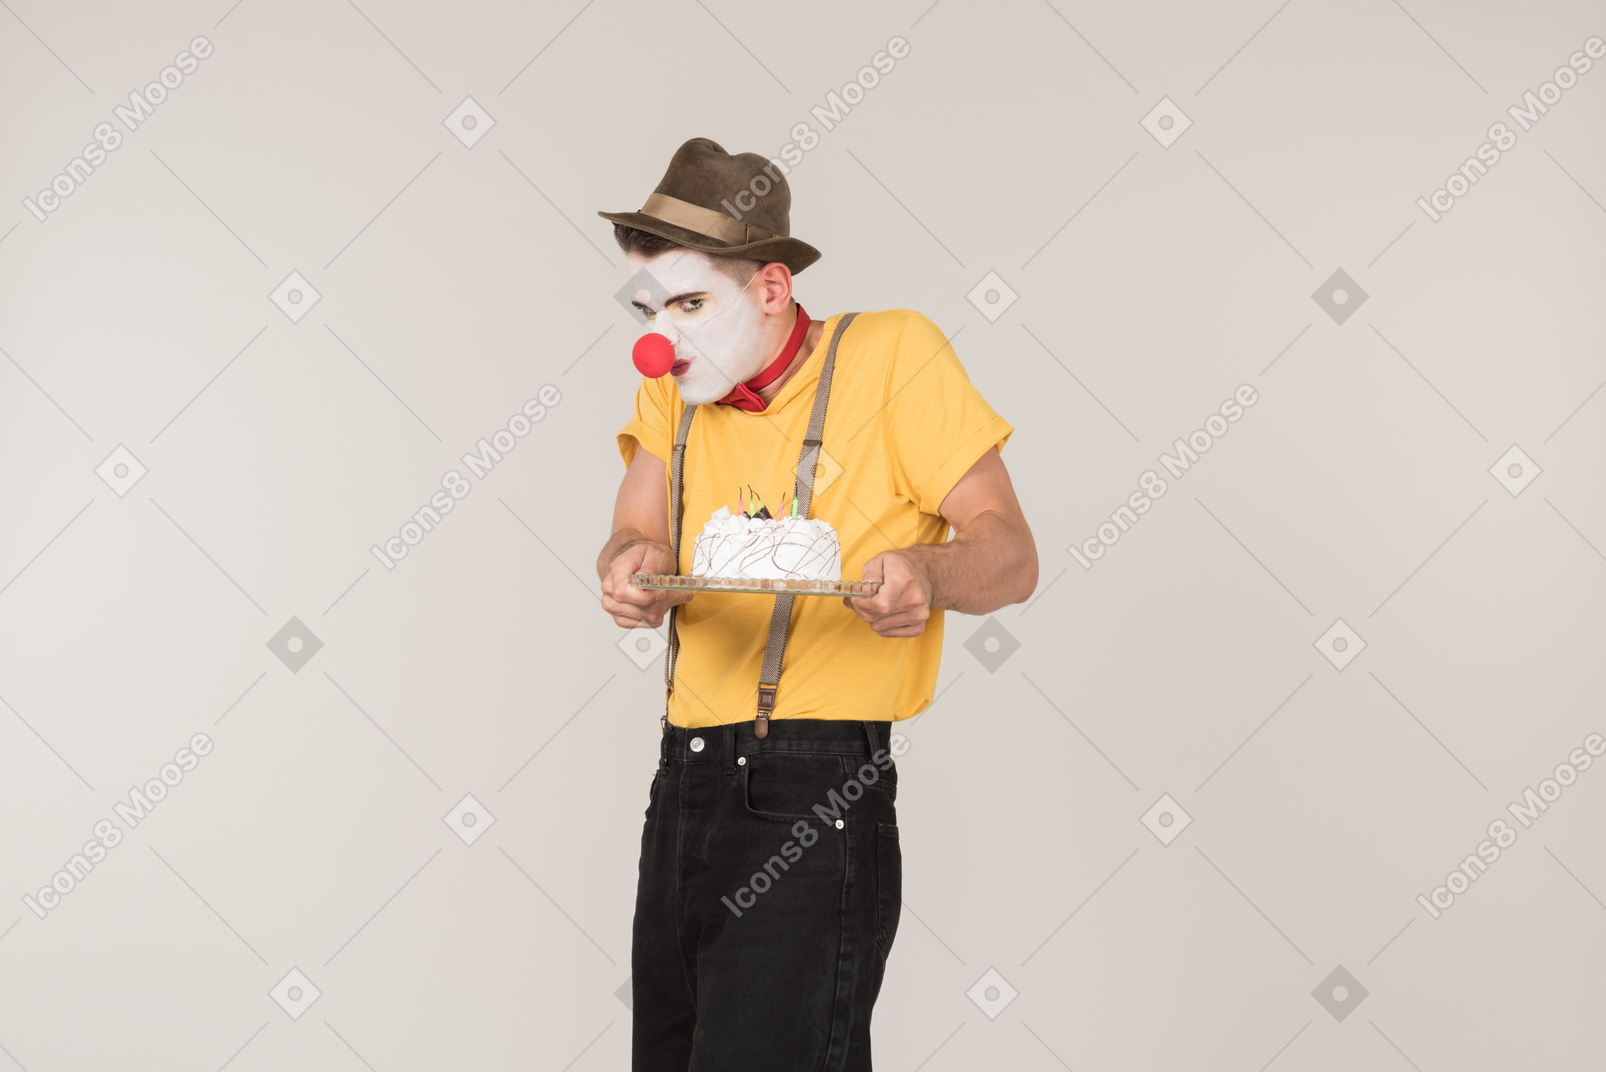 Male clown tasting a cake he's holding